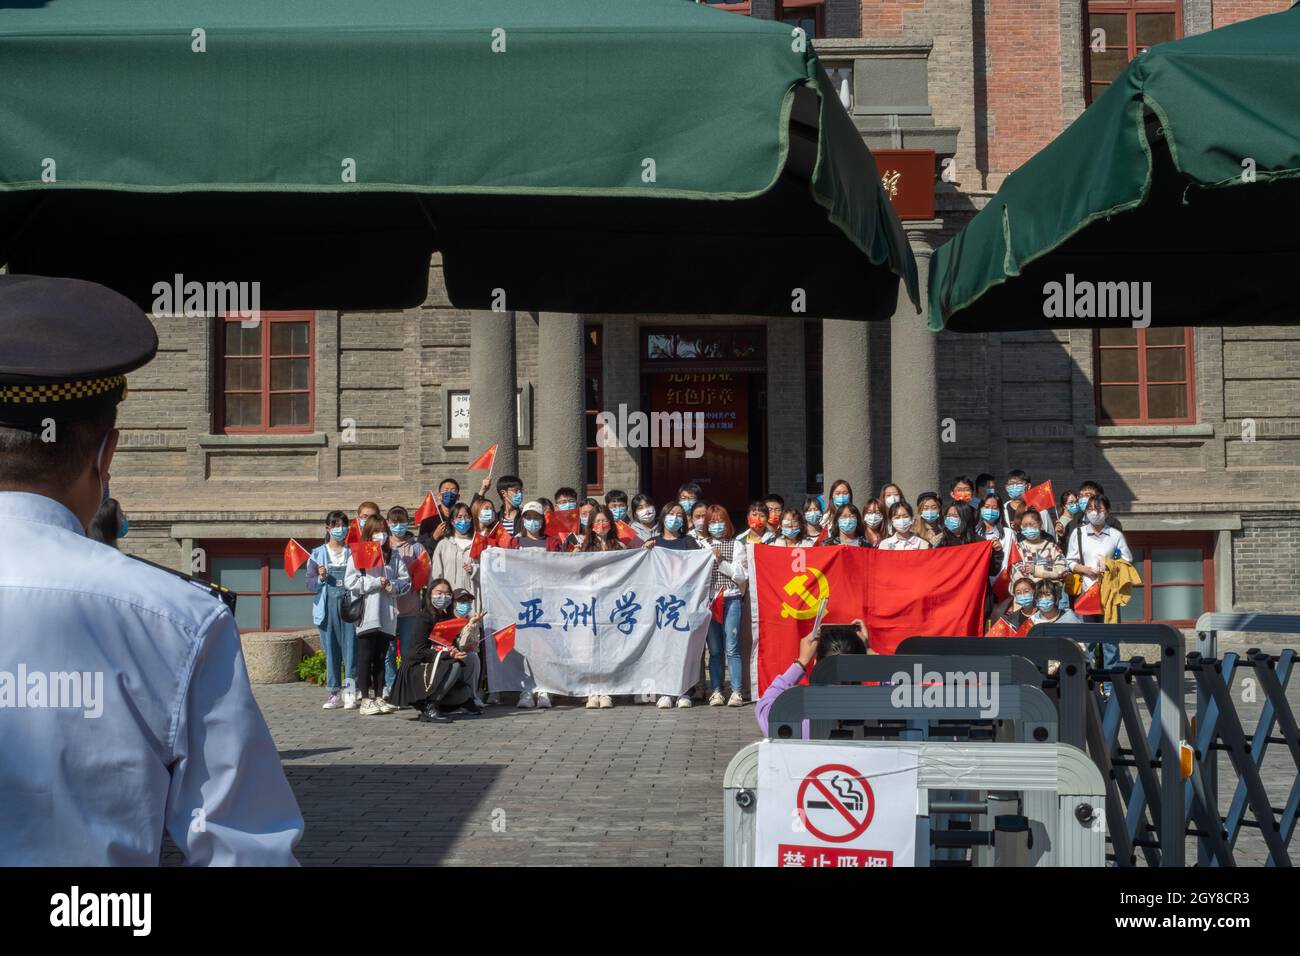 Chinese Communist Party members from a university have a group photo with a party flag in front of the historical Red Building of Peking University in Stock Photo